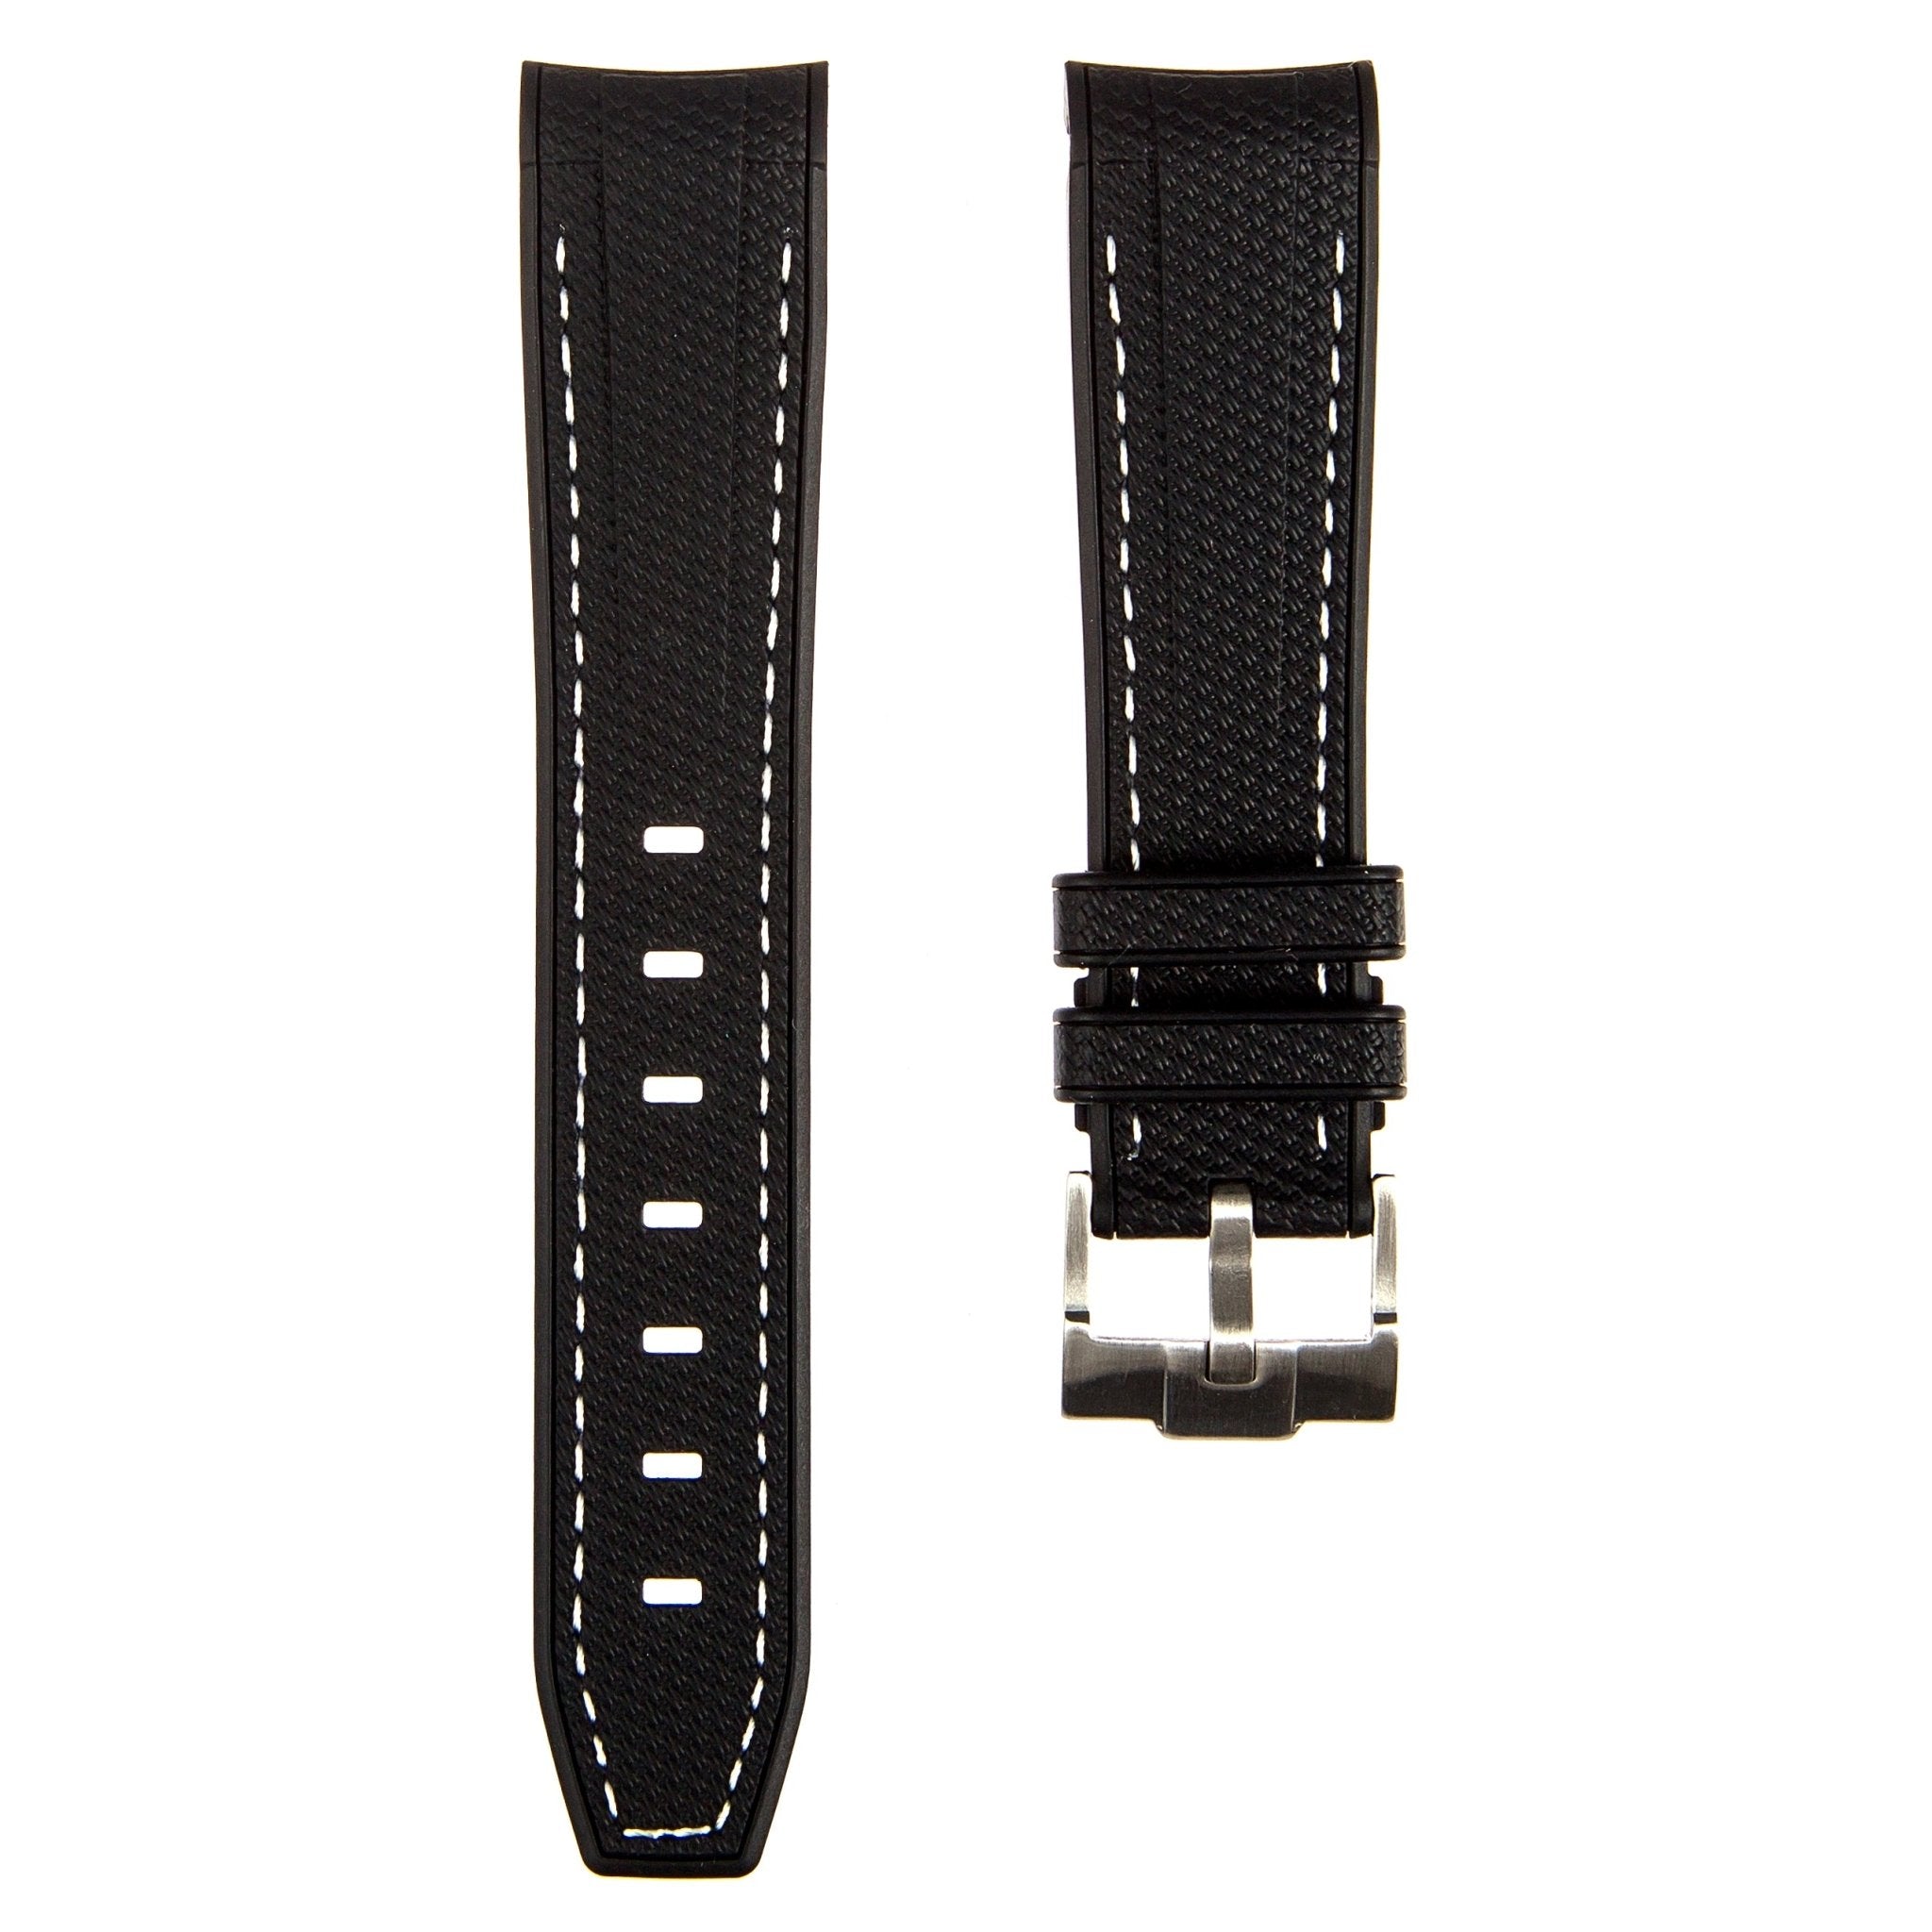 Textured Curved End Premium Silicone Strap - Black with White Stitch (2405) -StrapSeeker